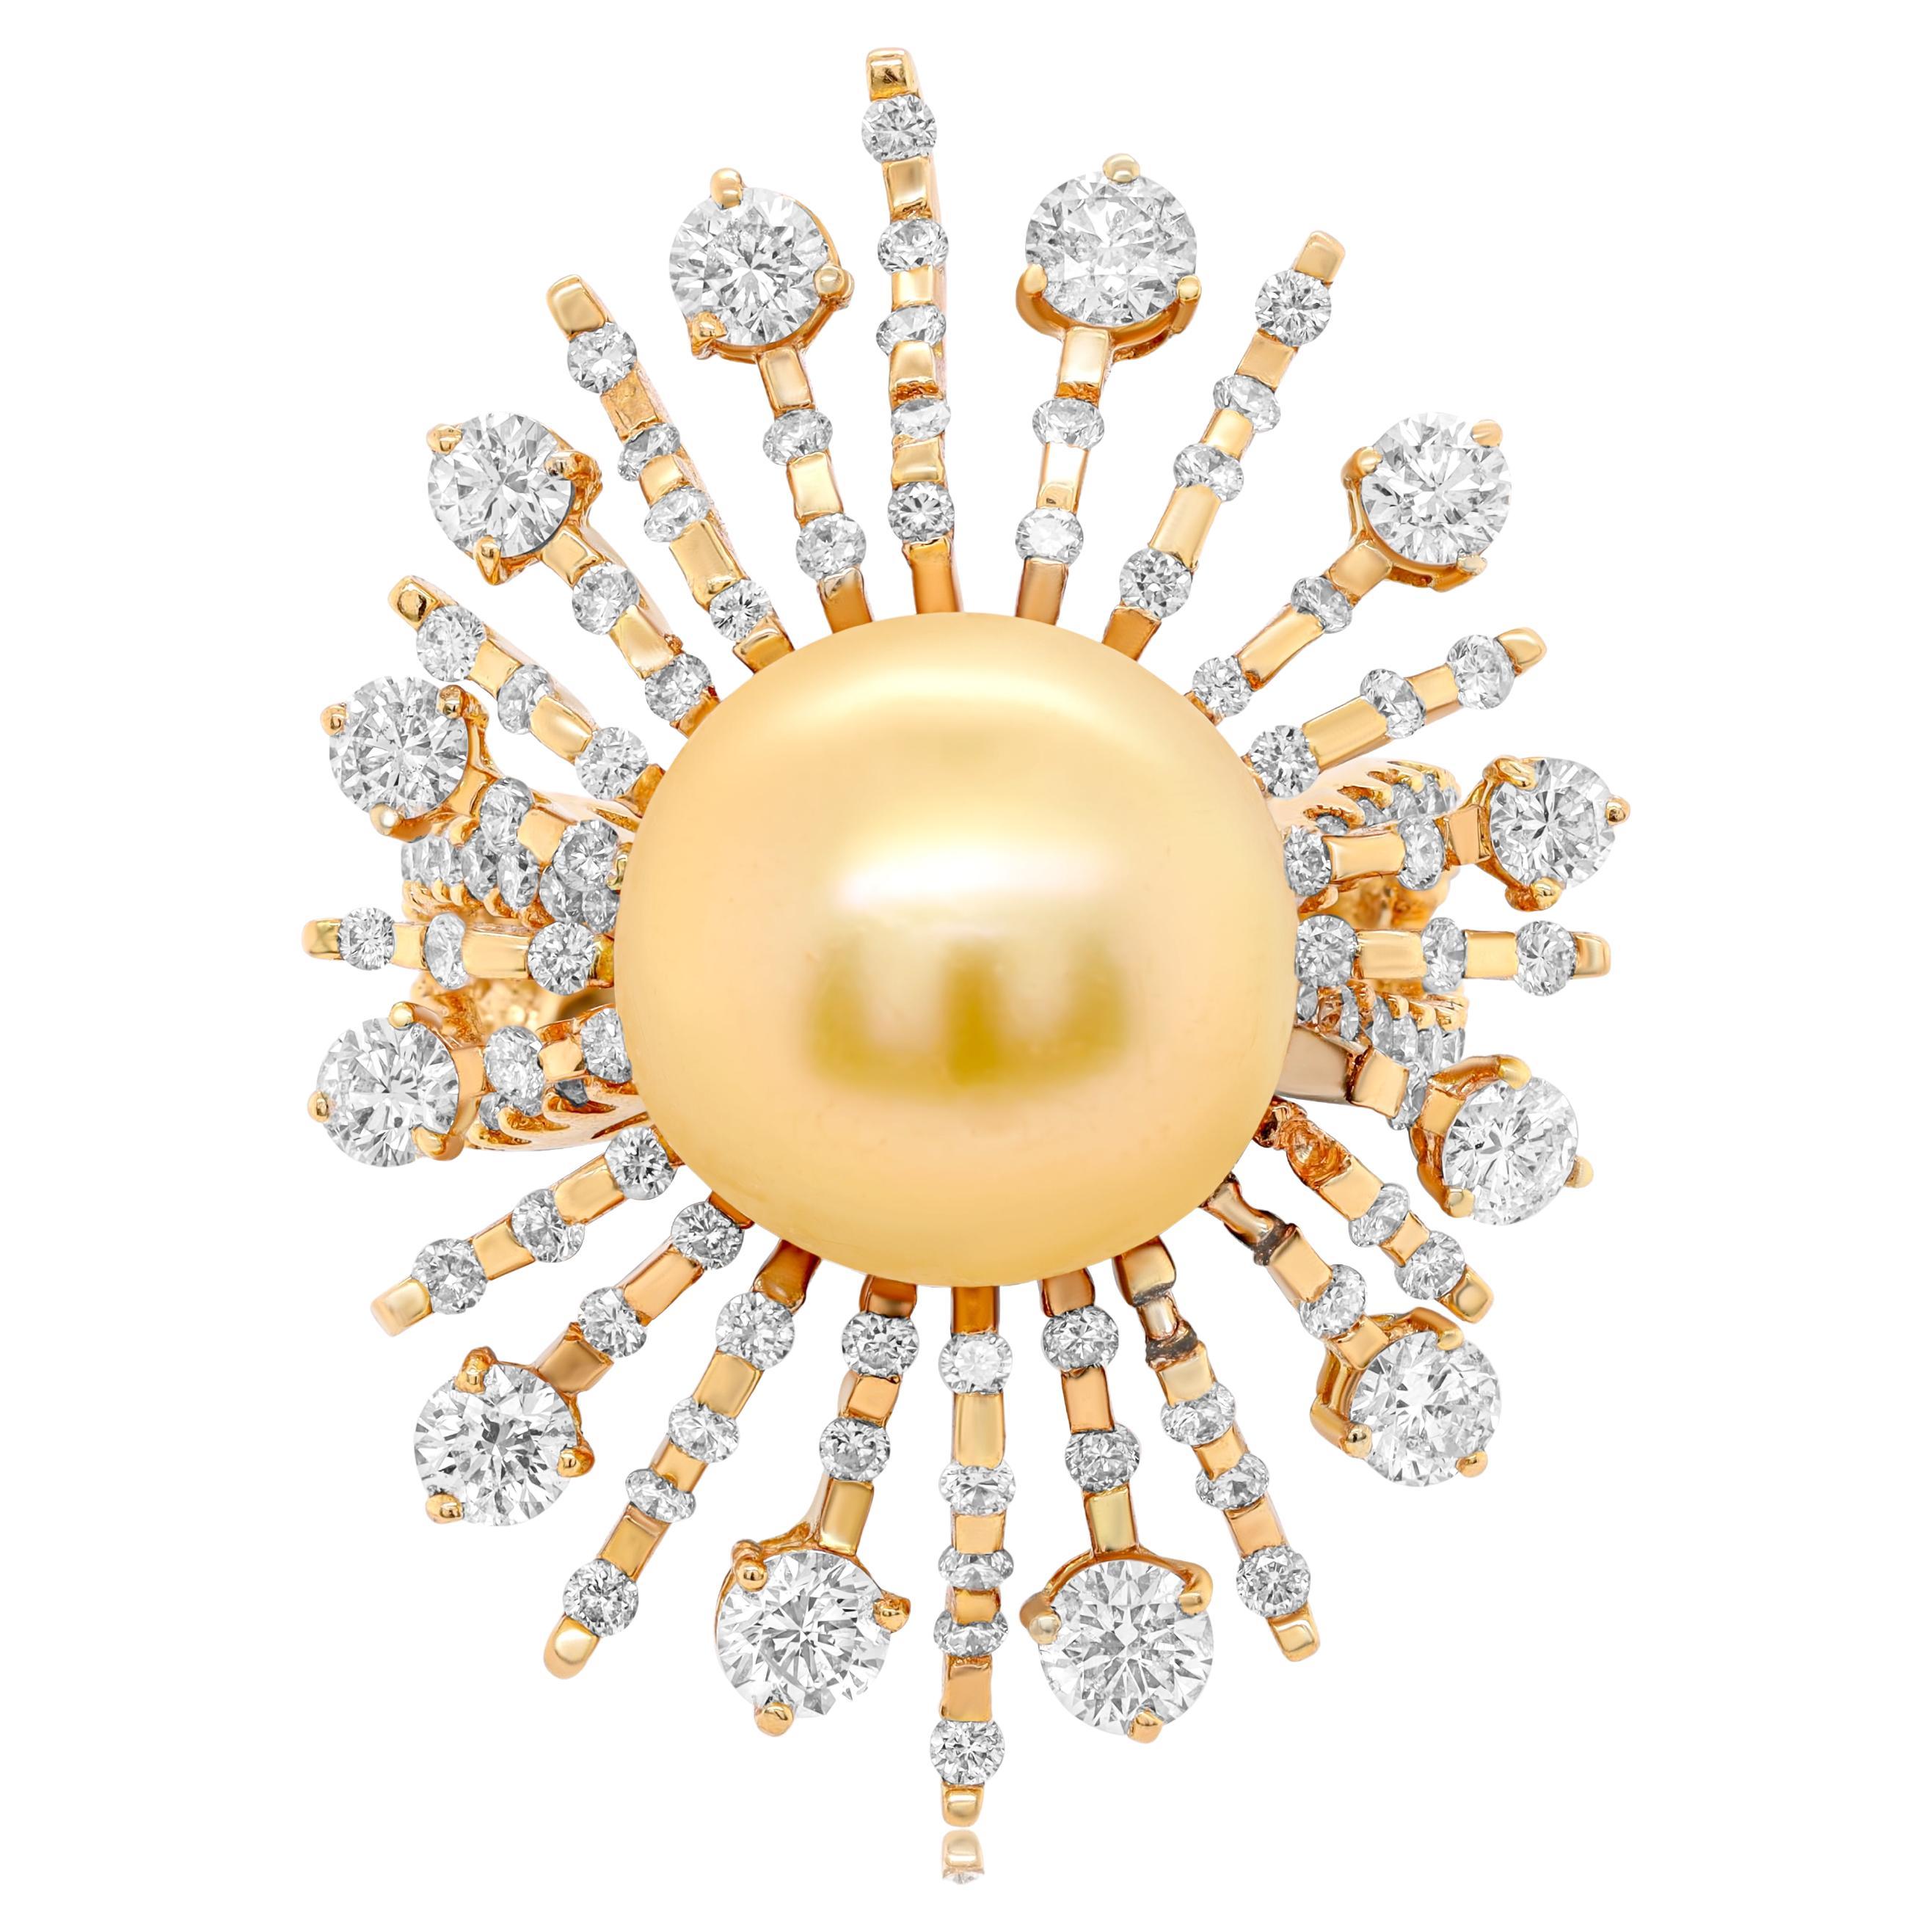 Diana M.18 kt yellow gold diamond and pearl ring featuring a 13.5 mm yellow pear For Sale